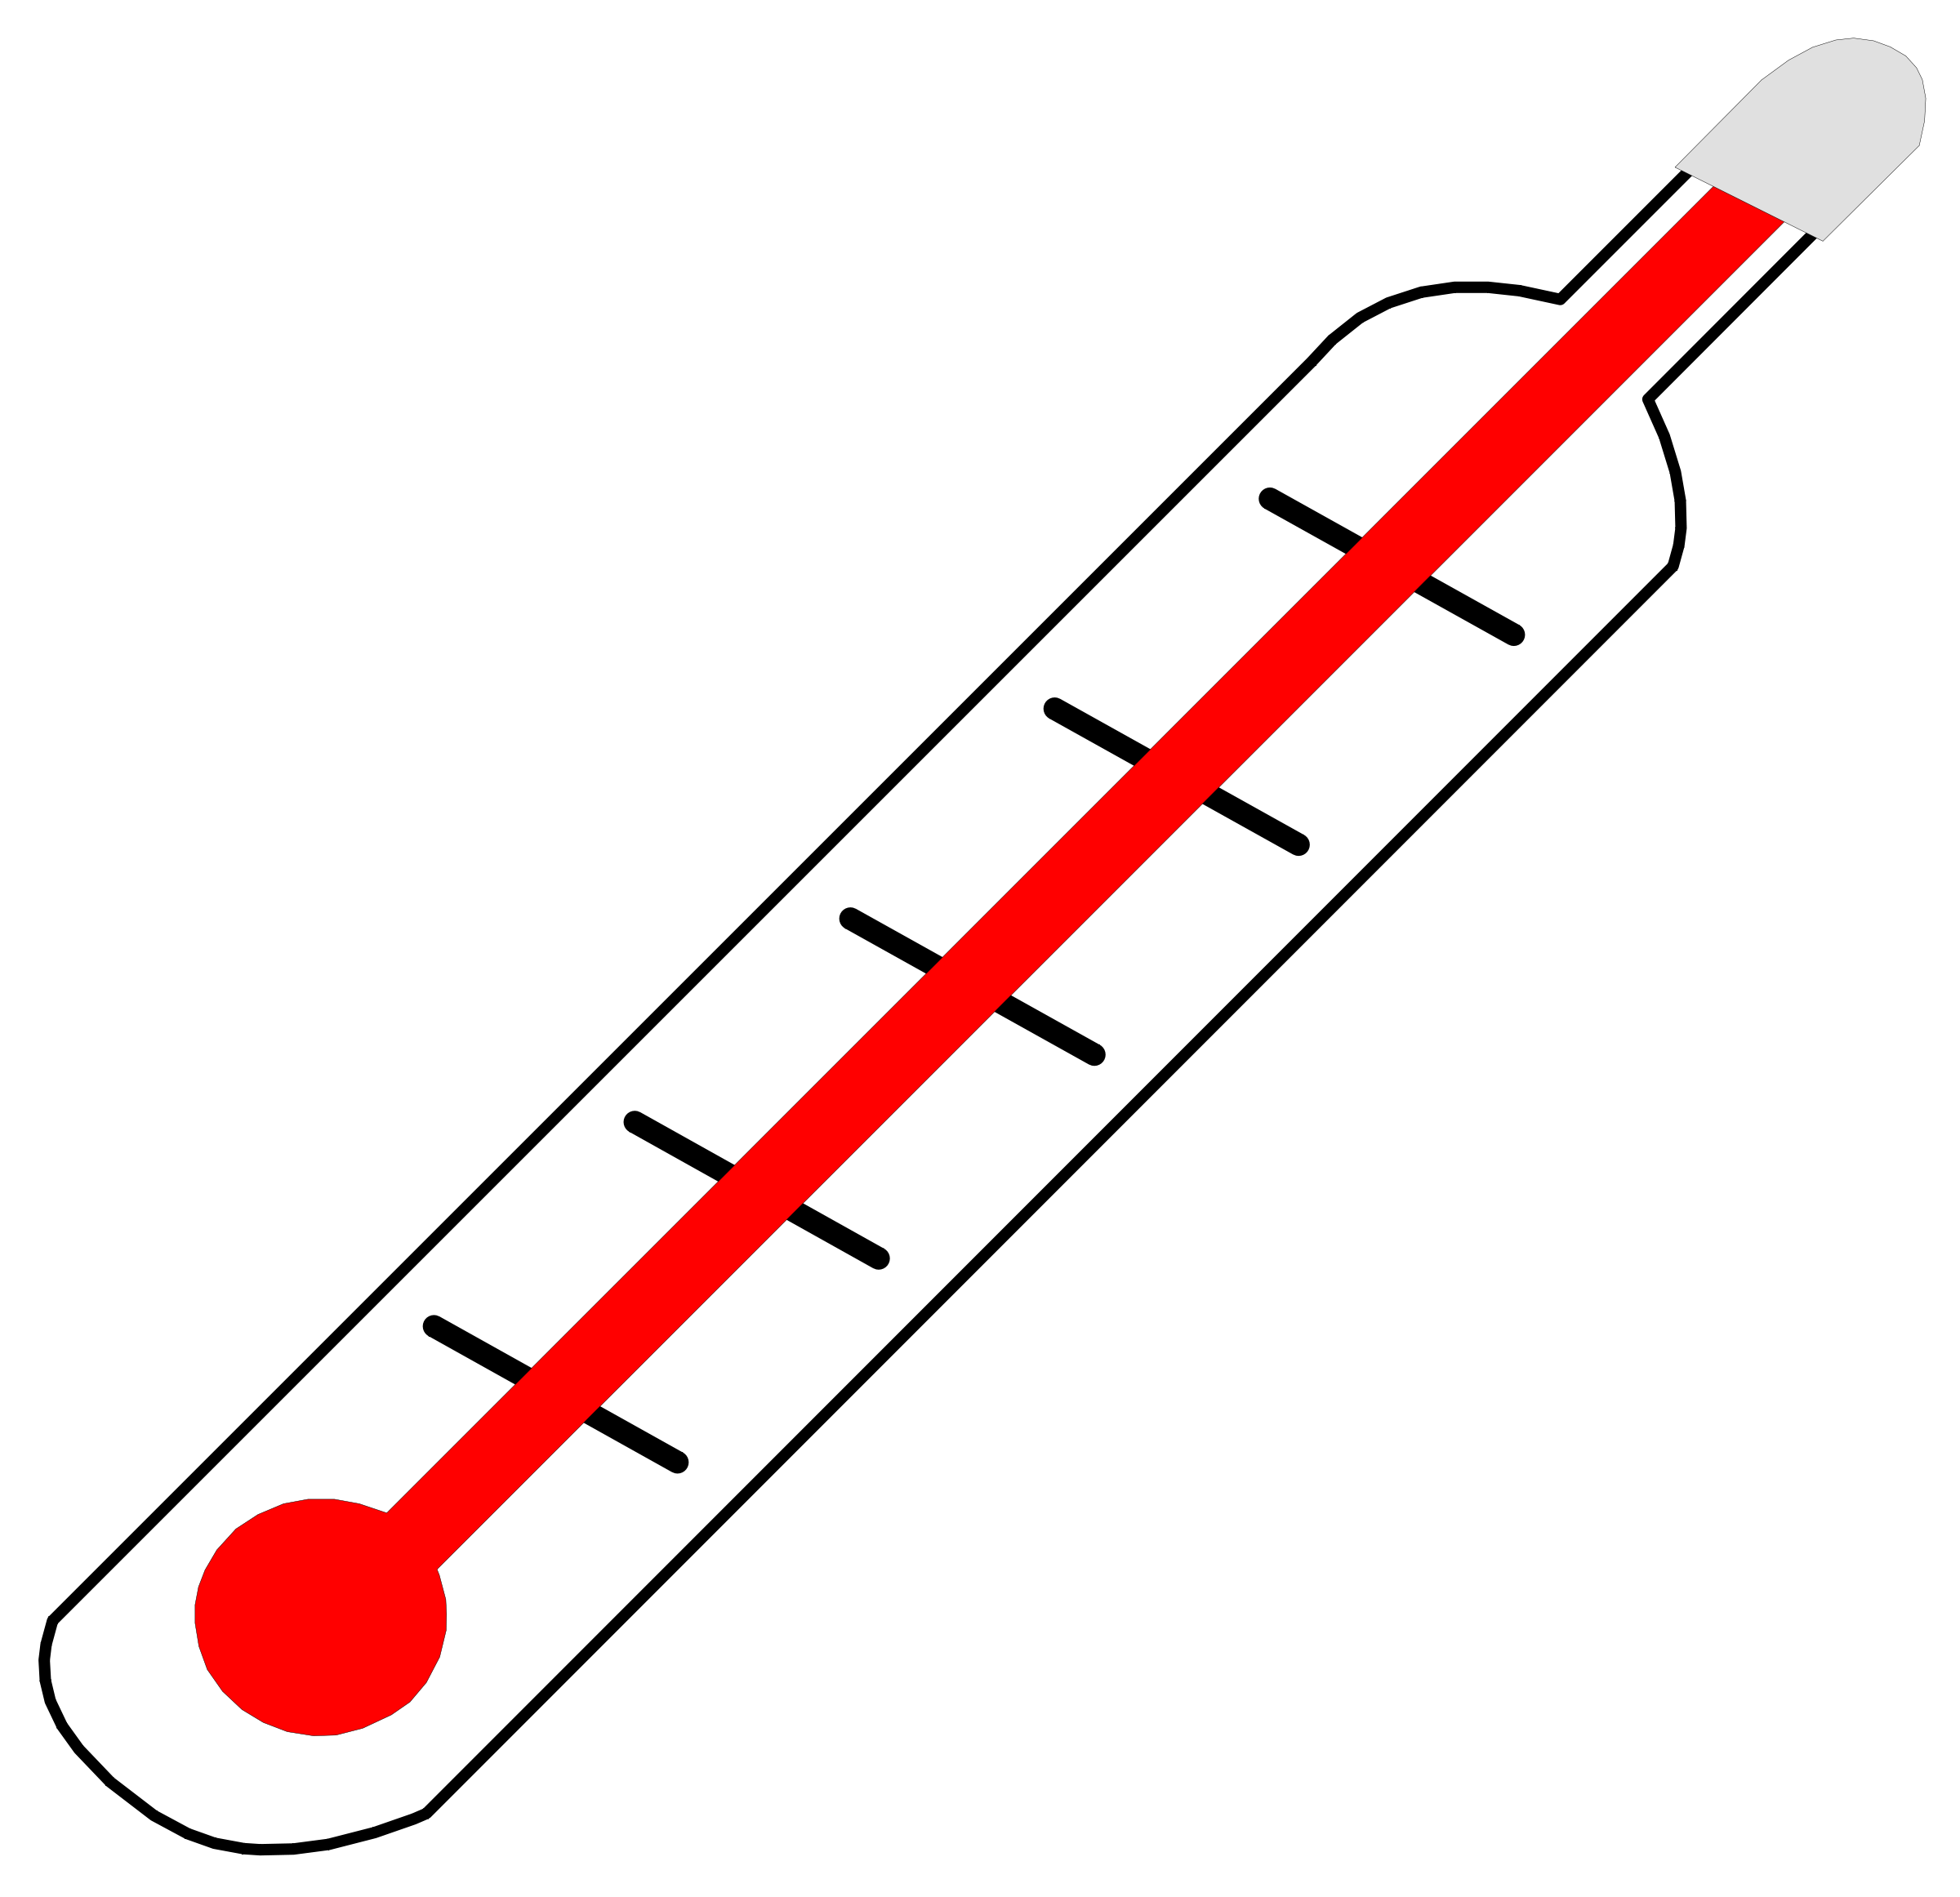 Thermometer hot outline clip art at vector clip art image #10839